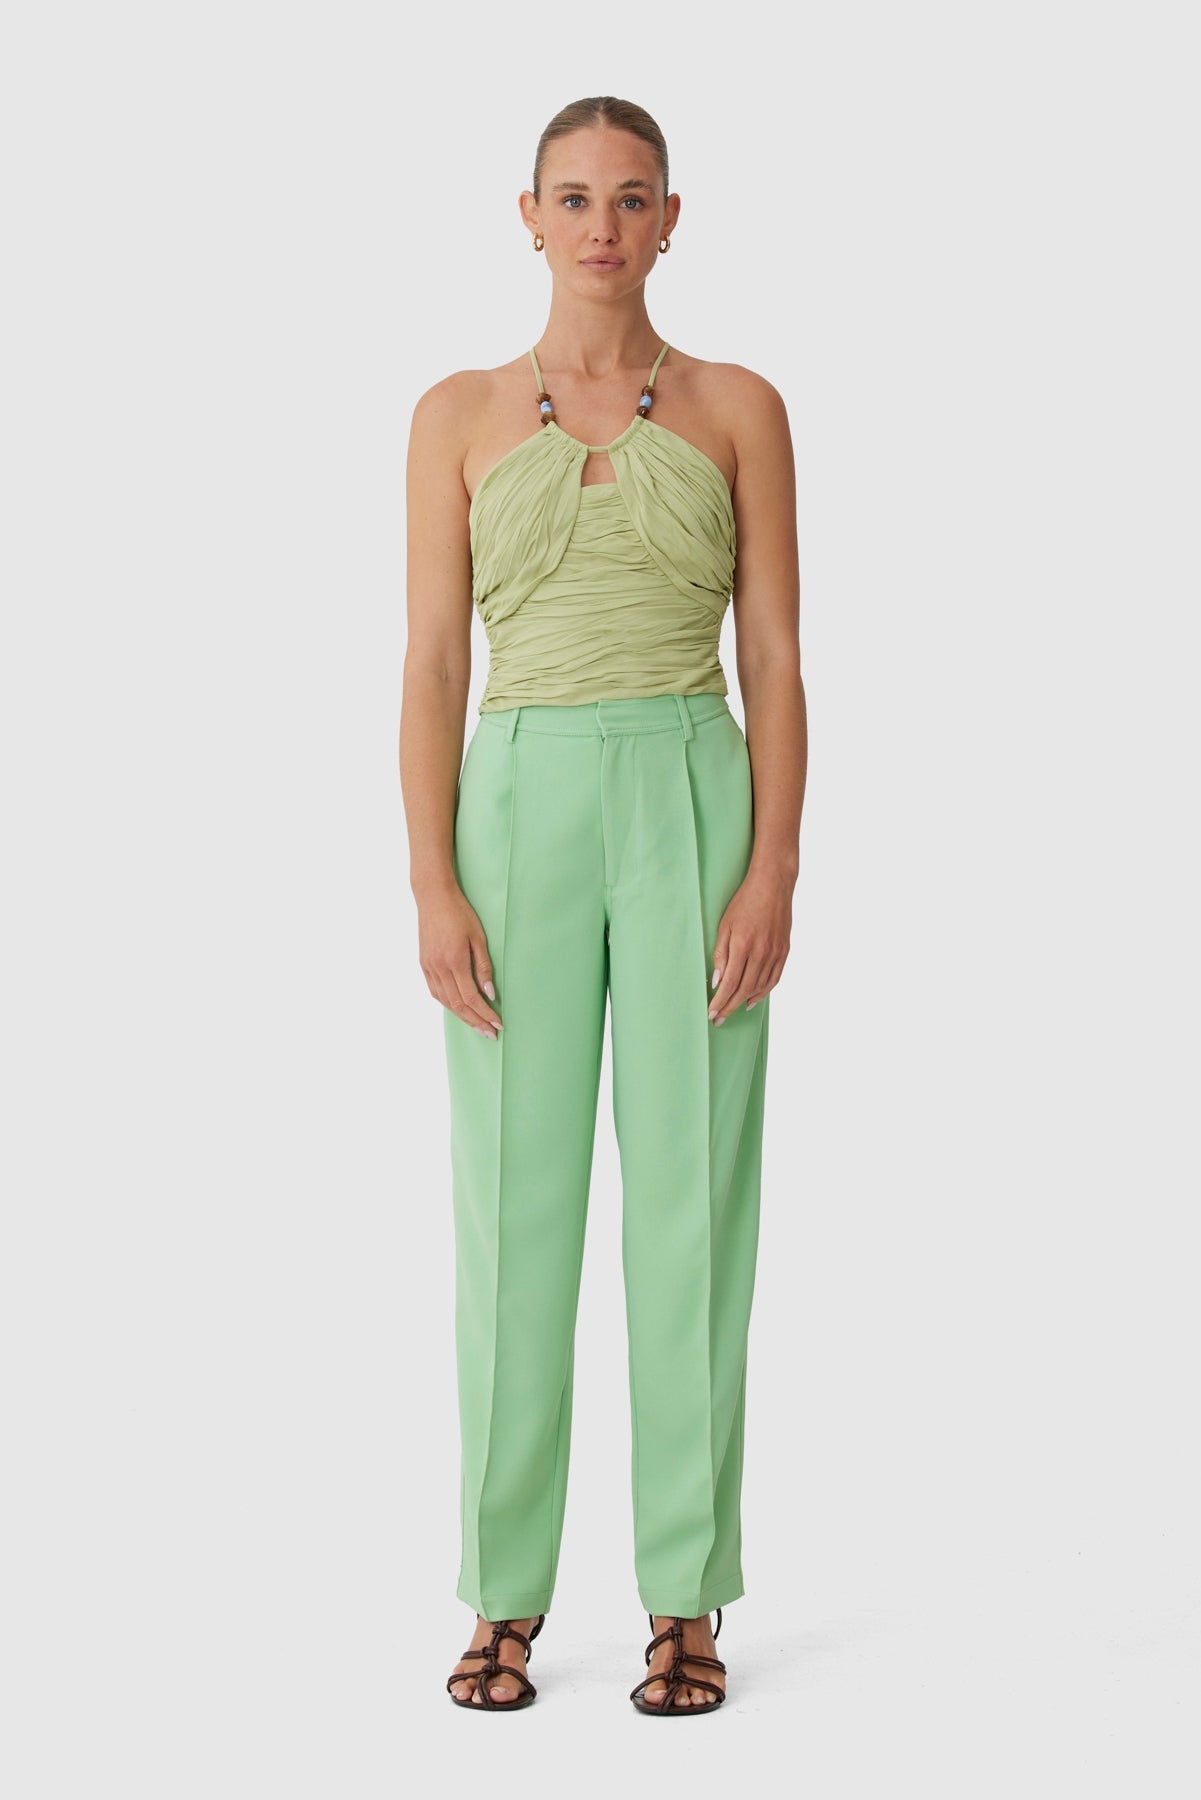 C/MEO Collective - Never Again Pant - Nile Green